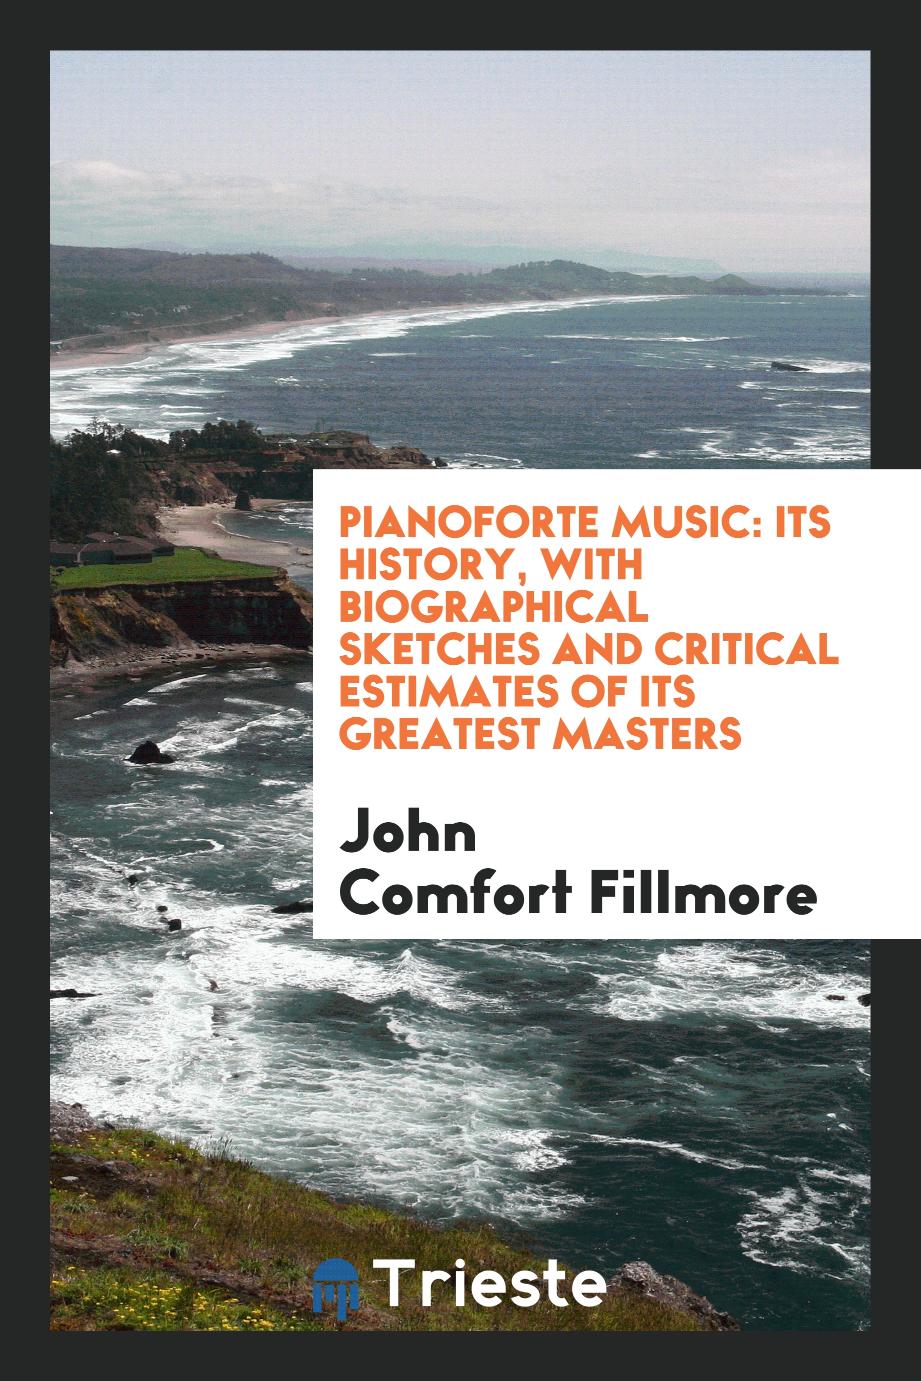 Pianoforte Music: Its History, with Biographical Sketches and Critical Estimates of Its Greatest Masters